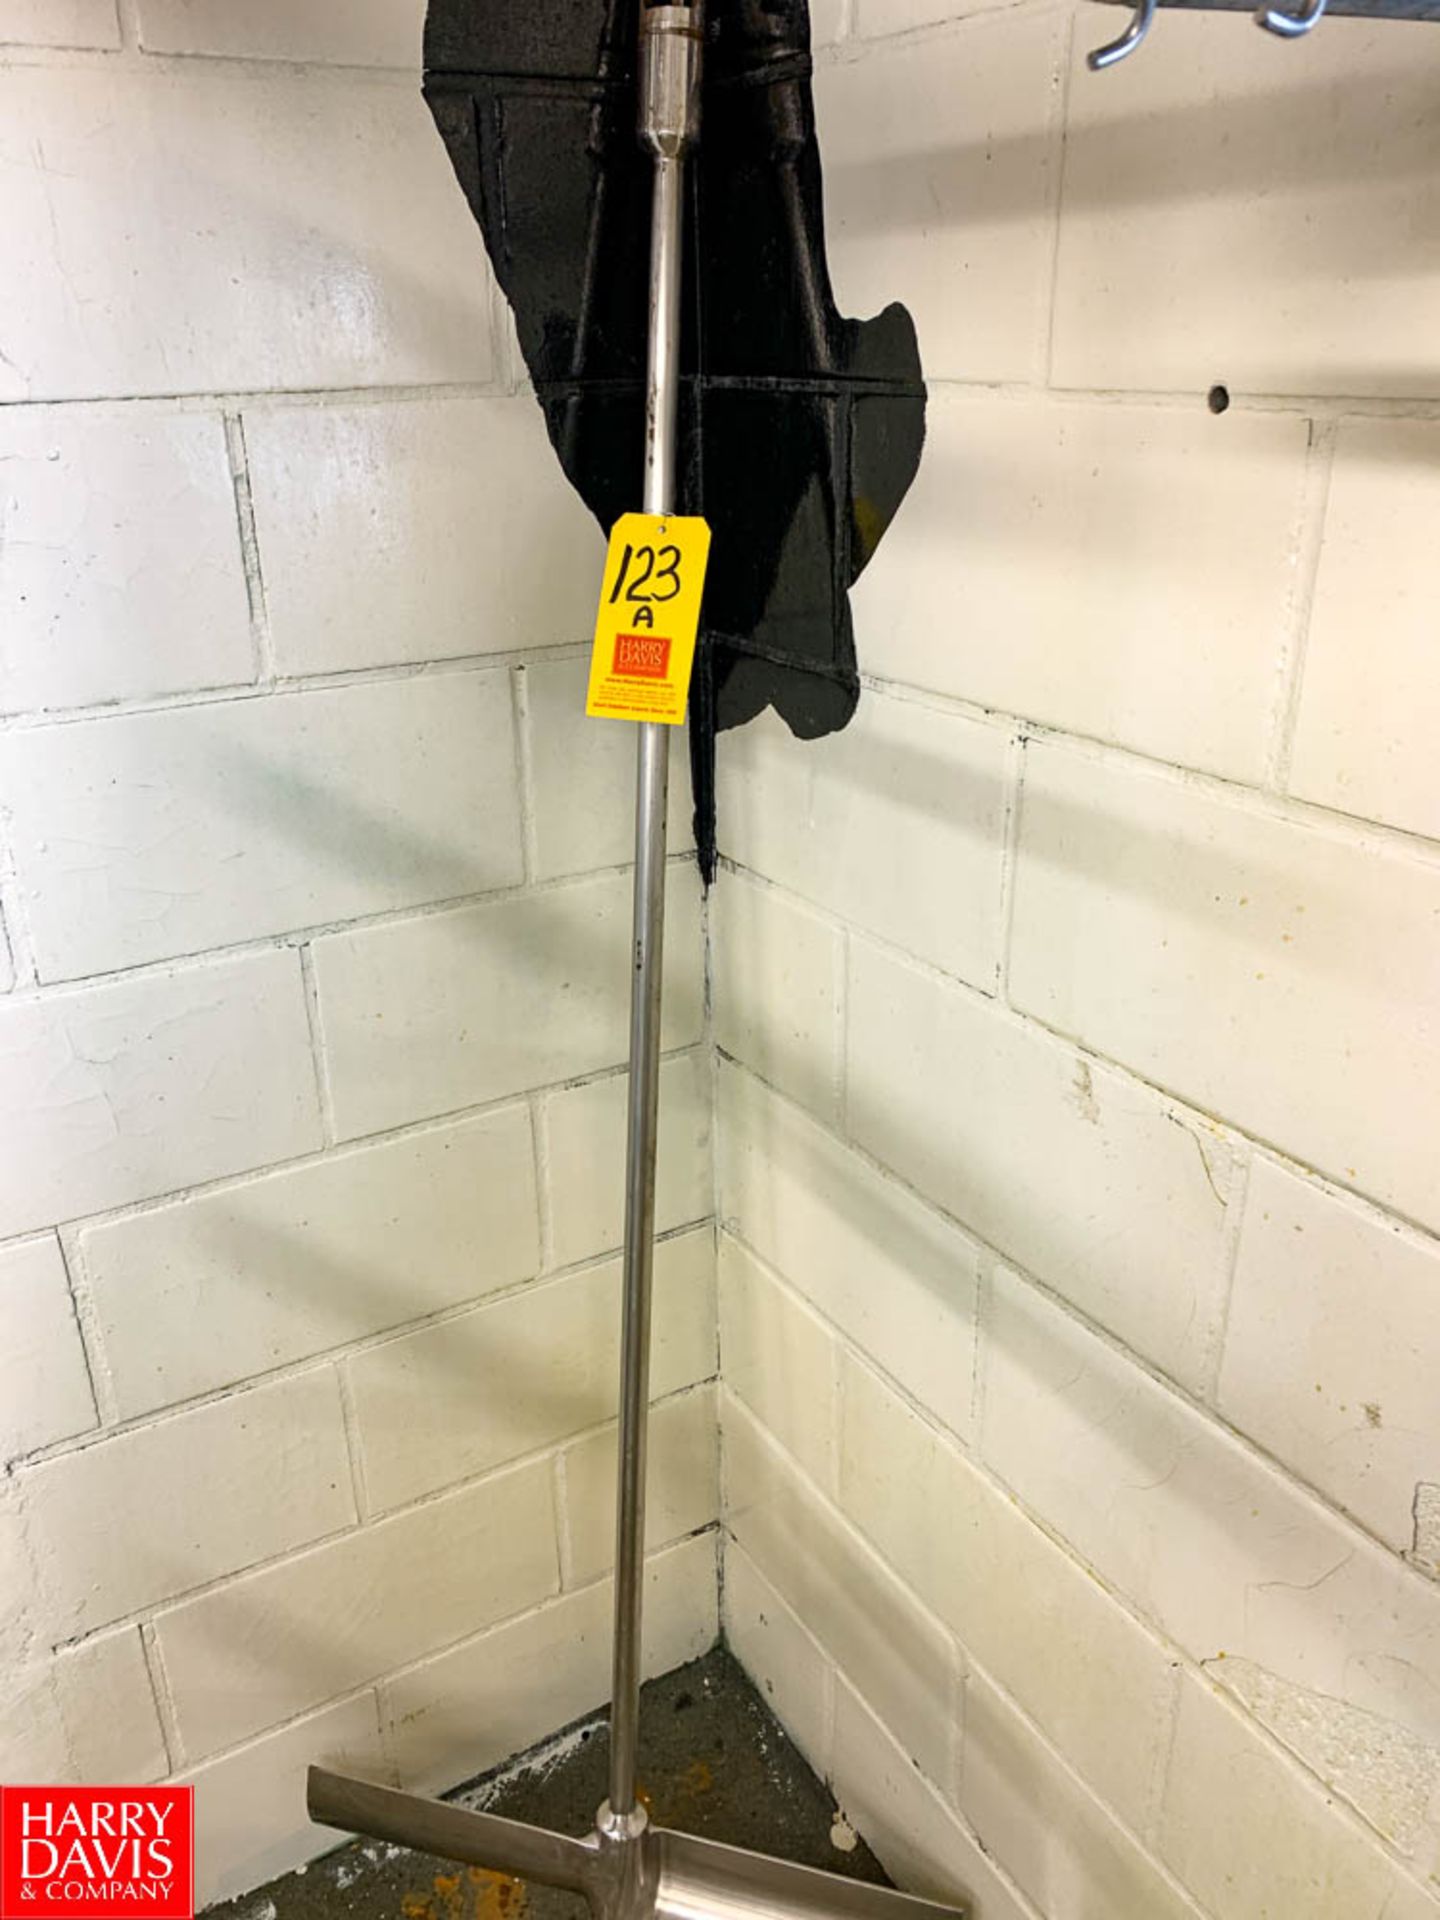 S/S Agitator Blade, Can Be Used On Lot 122 or 123, Located in:Rutland Rigging Fee: $ 25